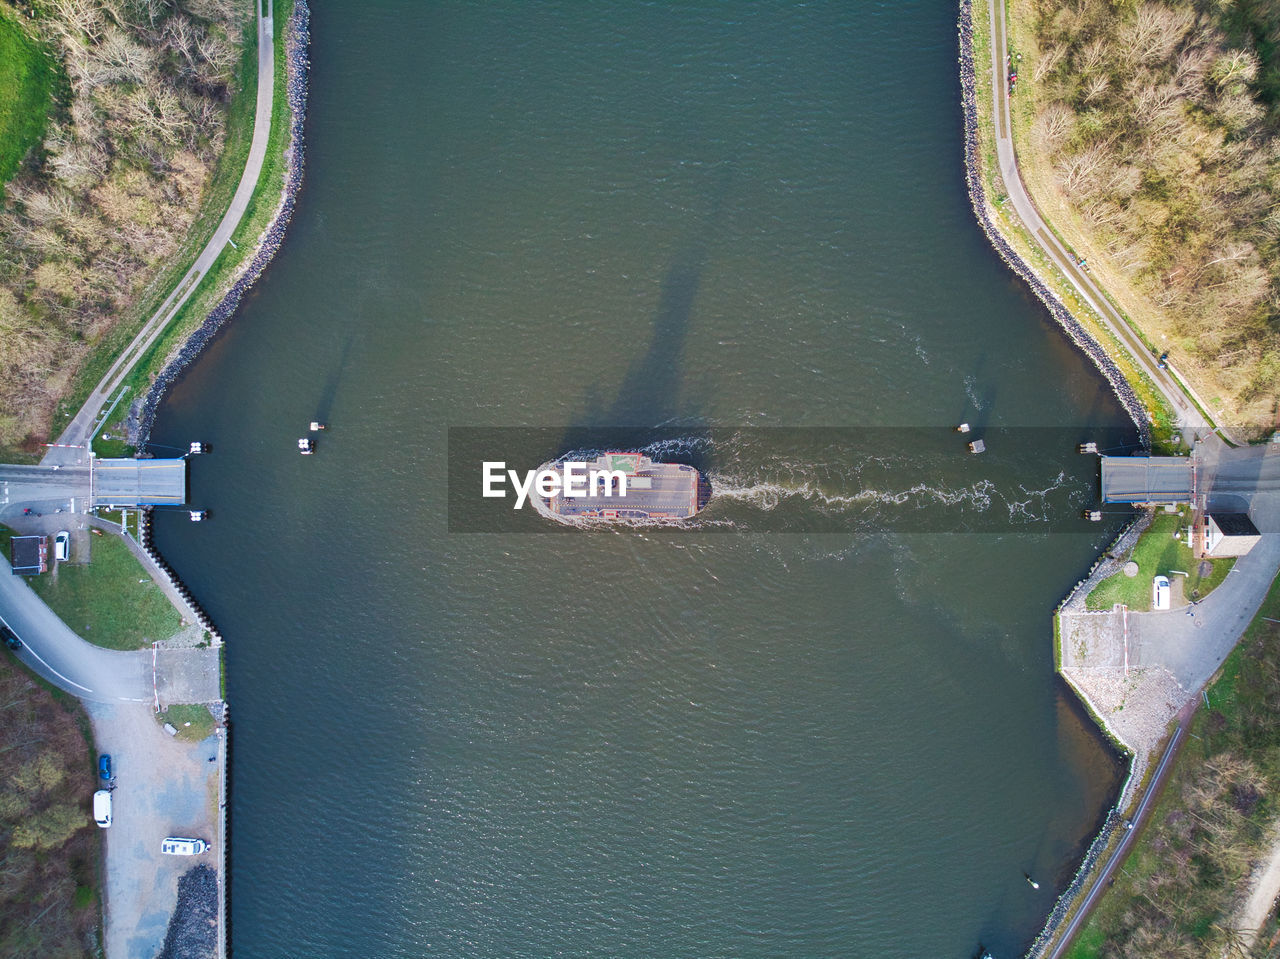 High angle view of boats in river